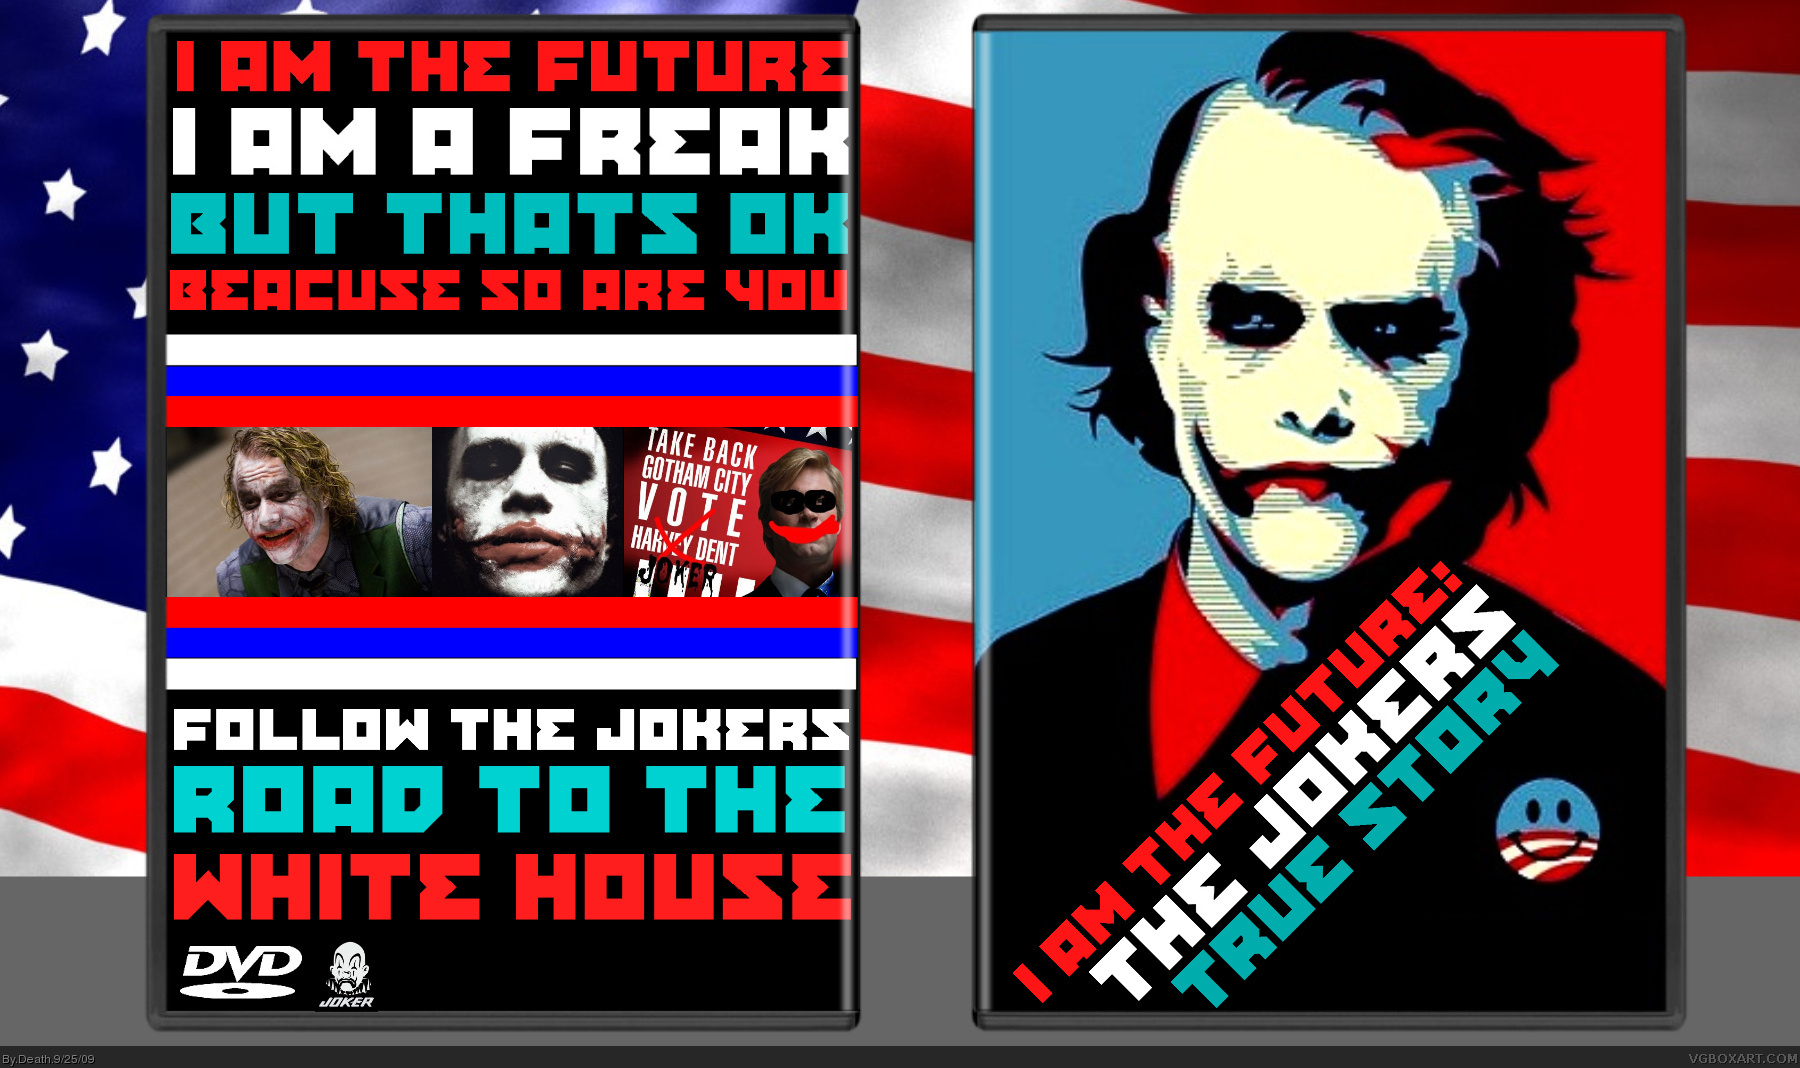 I Am The Future: The Jokers True Story box cover